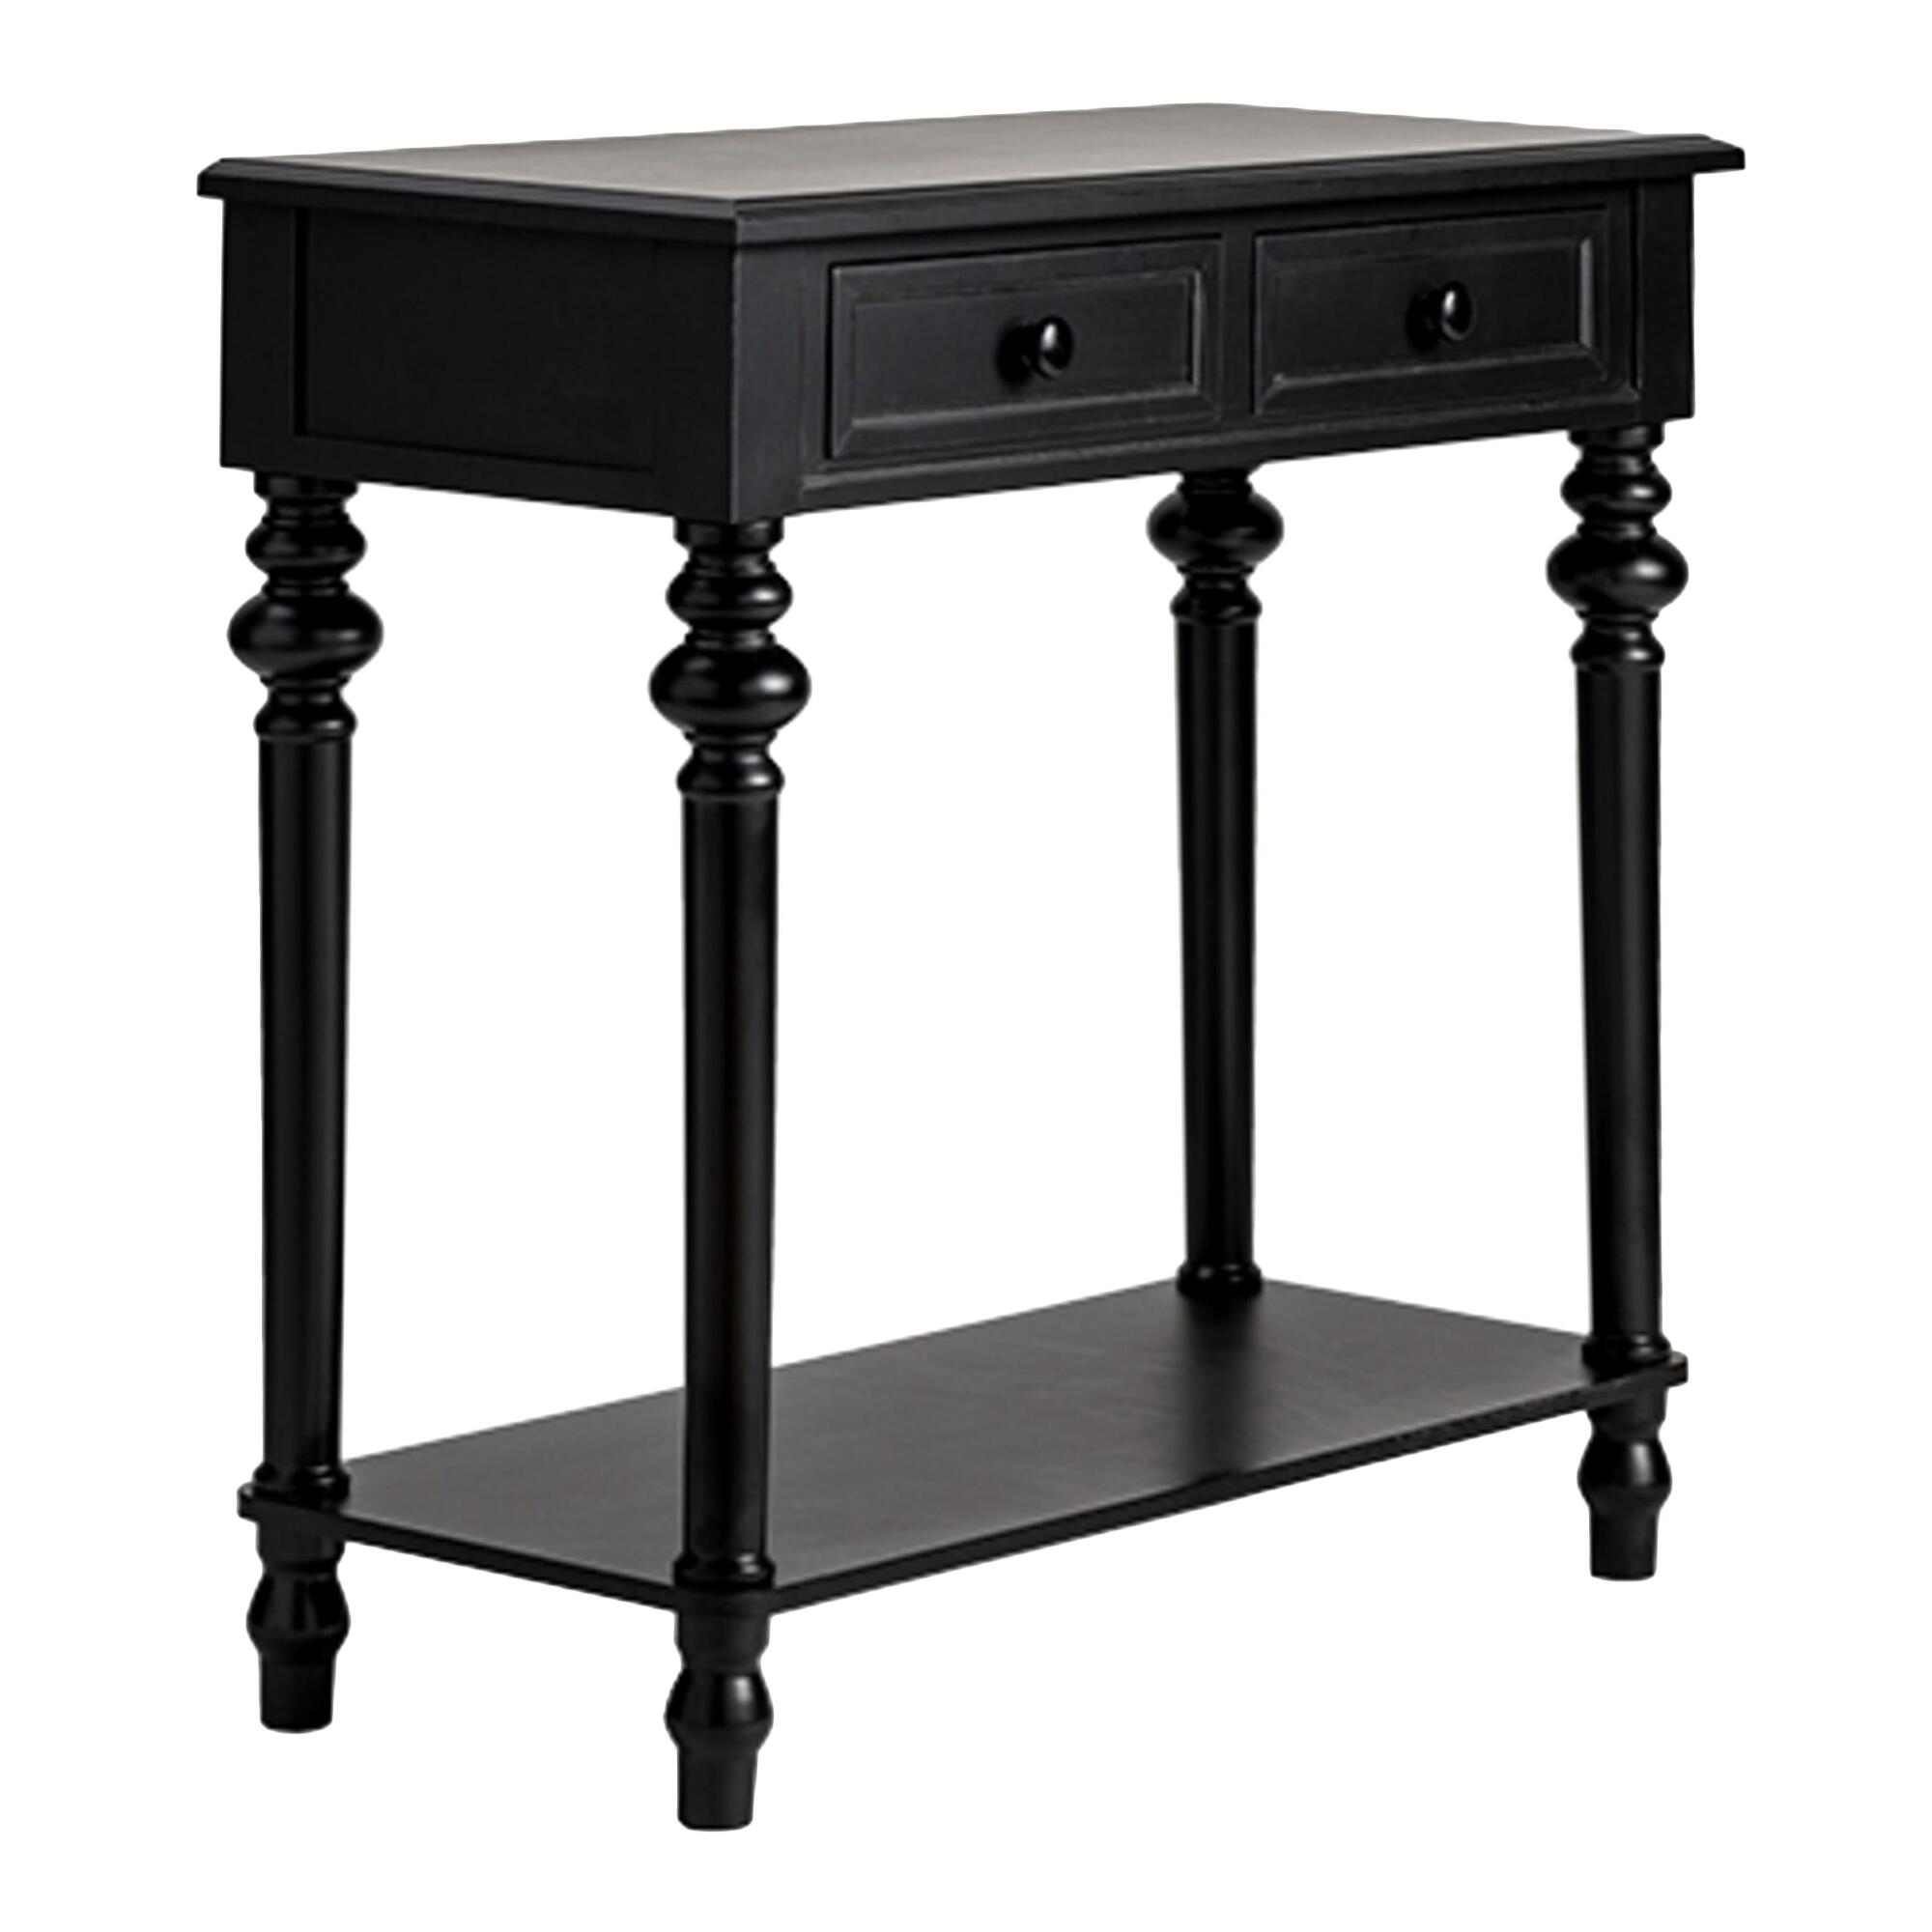 Black Wood Aiden Console Table With Drawers by World Market